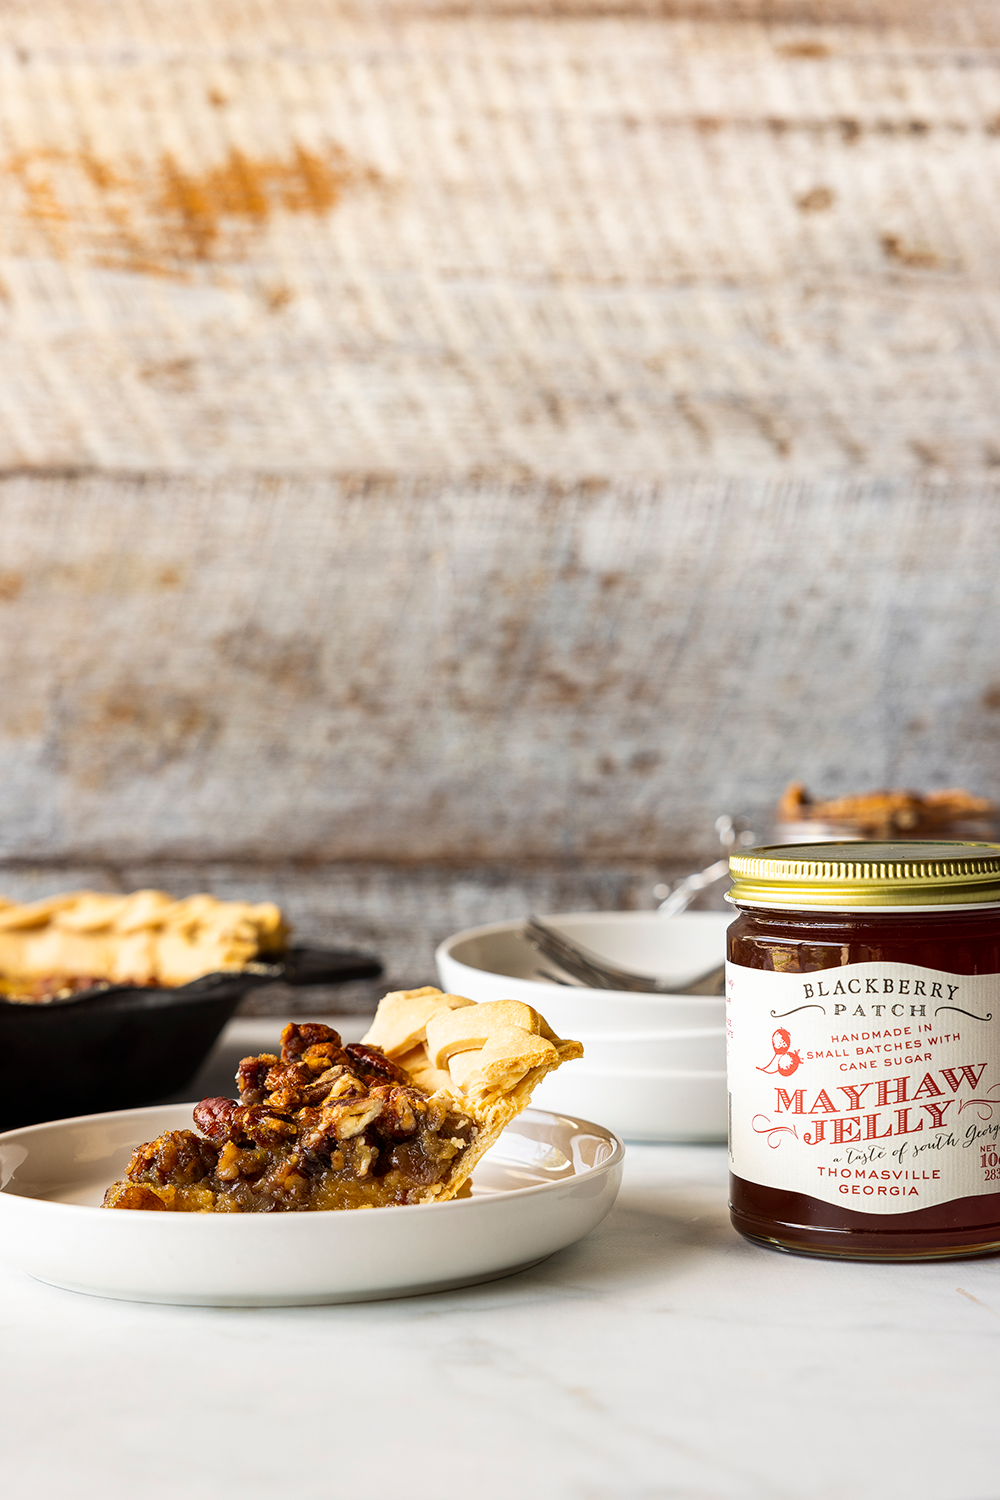 Image of Mayhaw Pecan Pie on a plate with jar of Mayhaw Jelly next to it. 